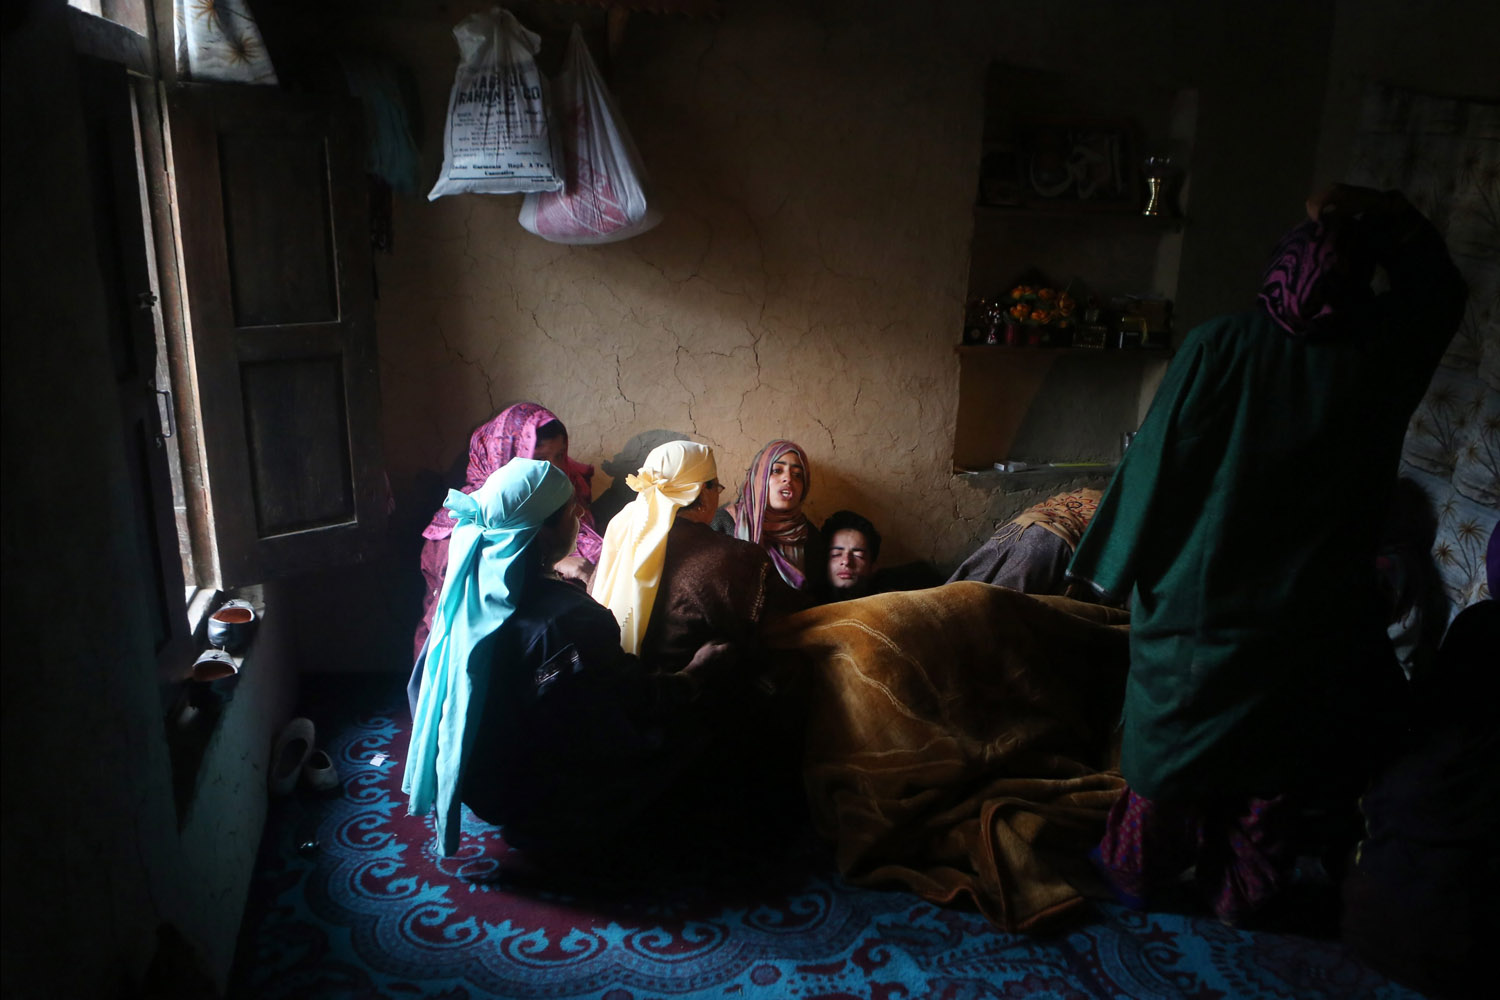 Apr. 18, 2014. Relatives mourn during the funeral of Indian Kashmir's main opposition Peoples Democratic Party rural body head (Sarpanch) Mohammad Amin Pandith, in Gulzarpora village in south Kashmir's Awantipora district.